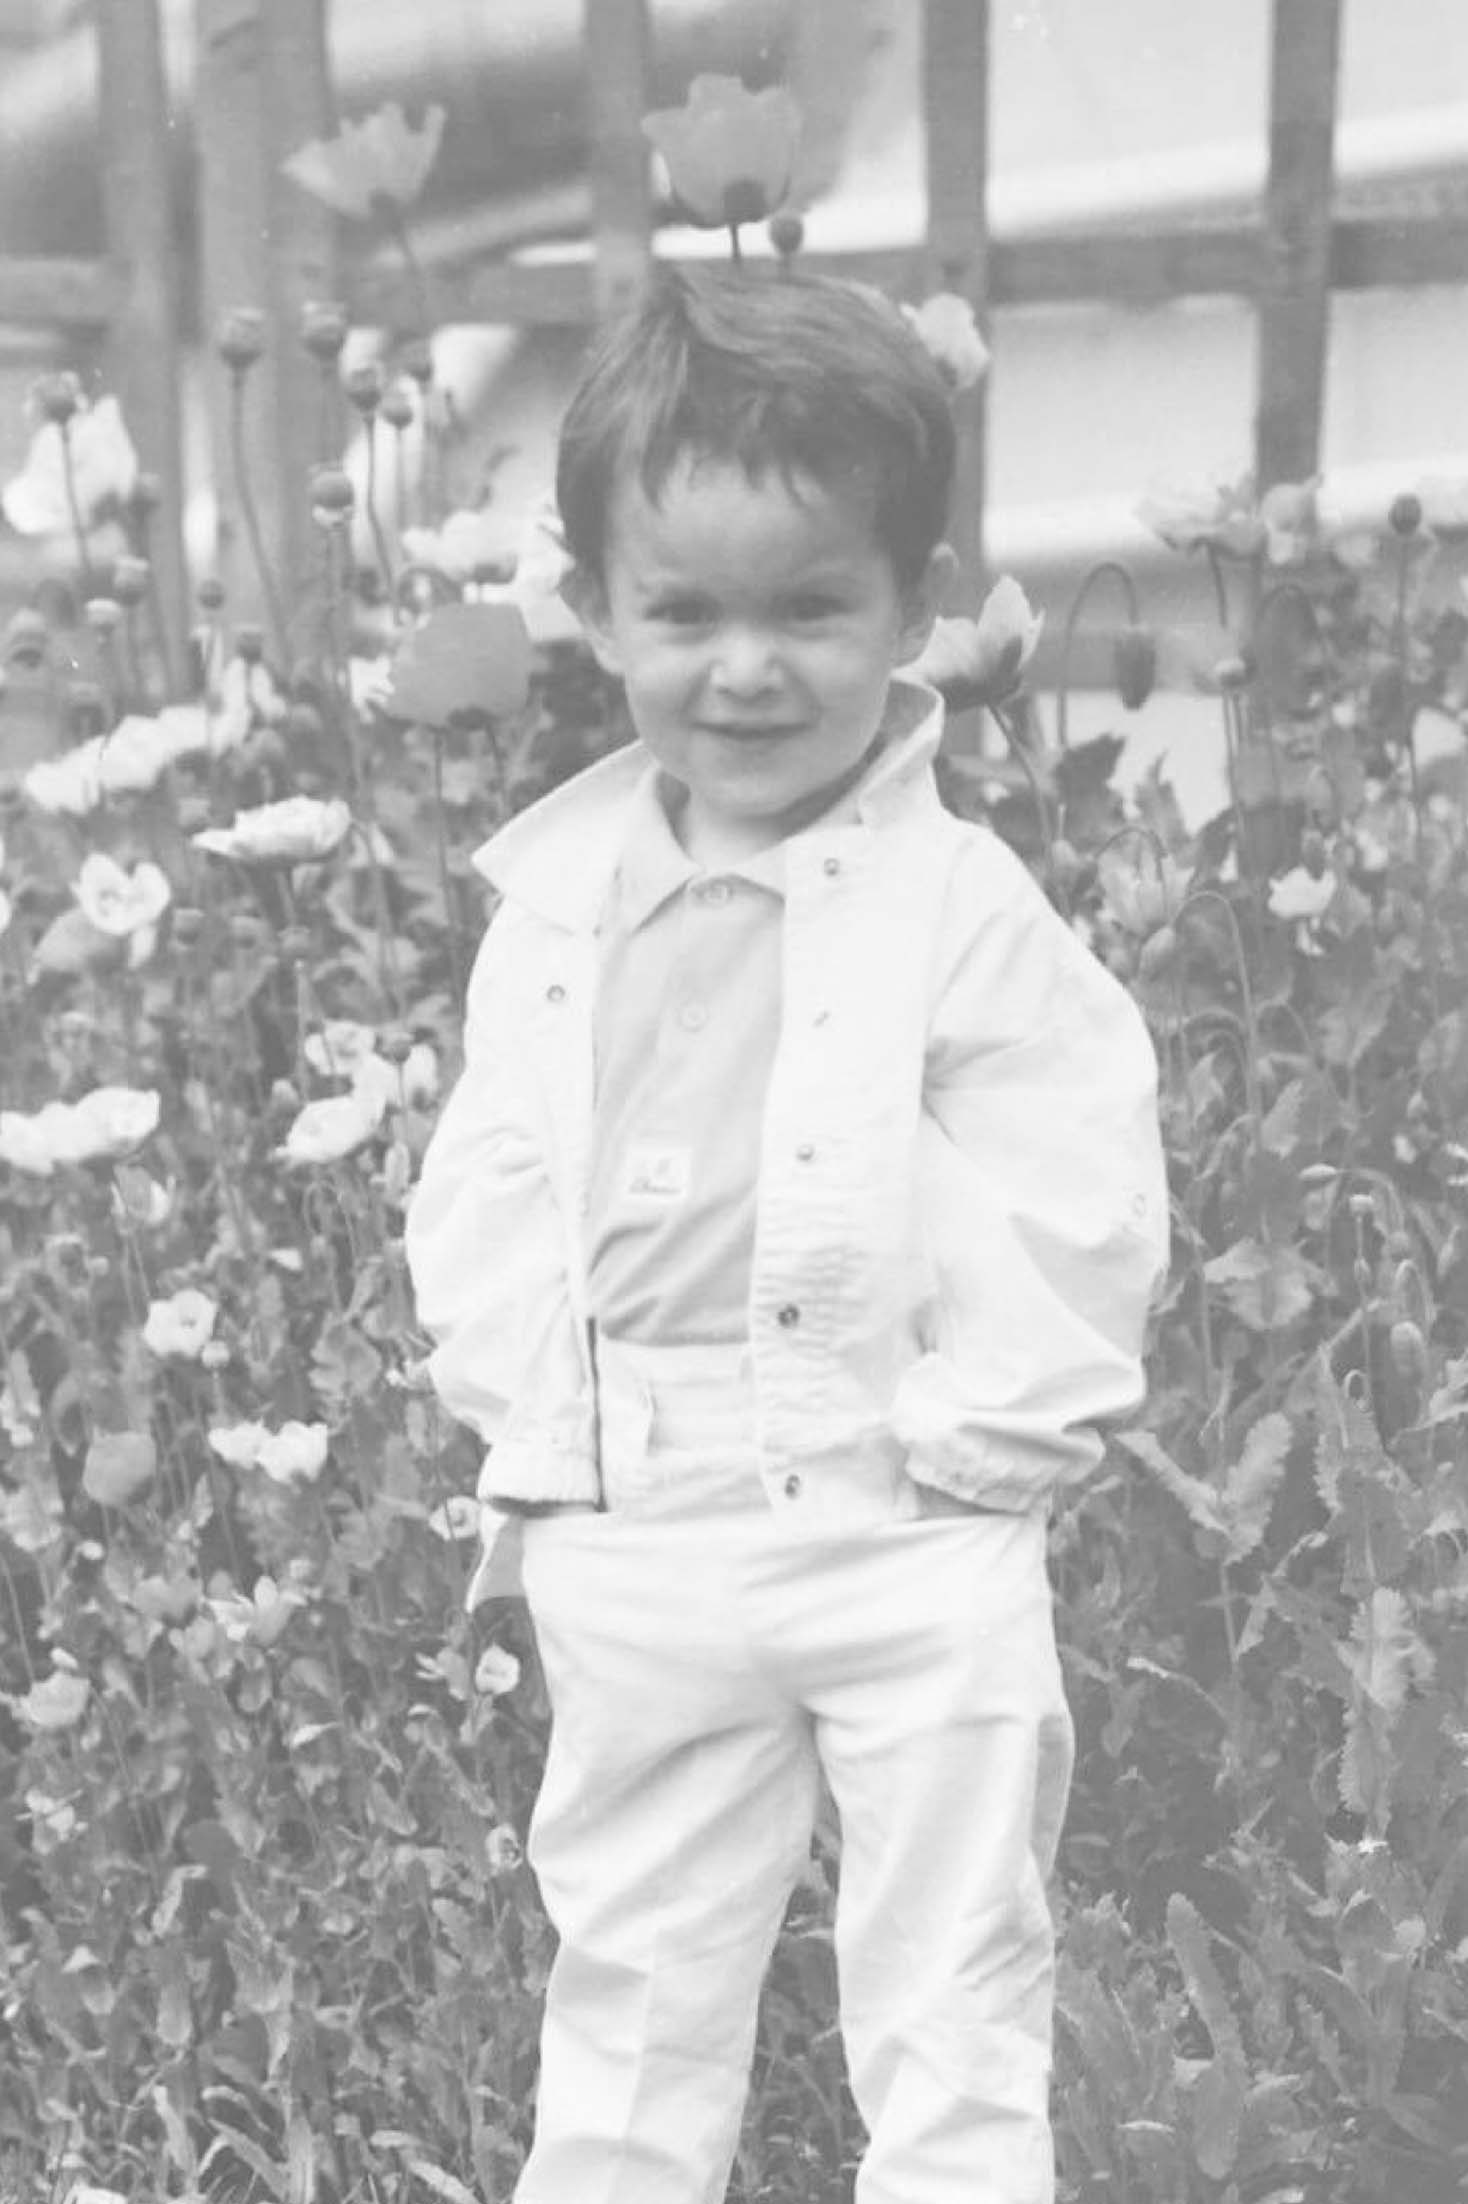 A photo of myself as a young boy, hands in pockets in front of some flowers looking cheeky.